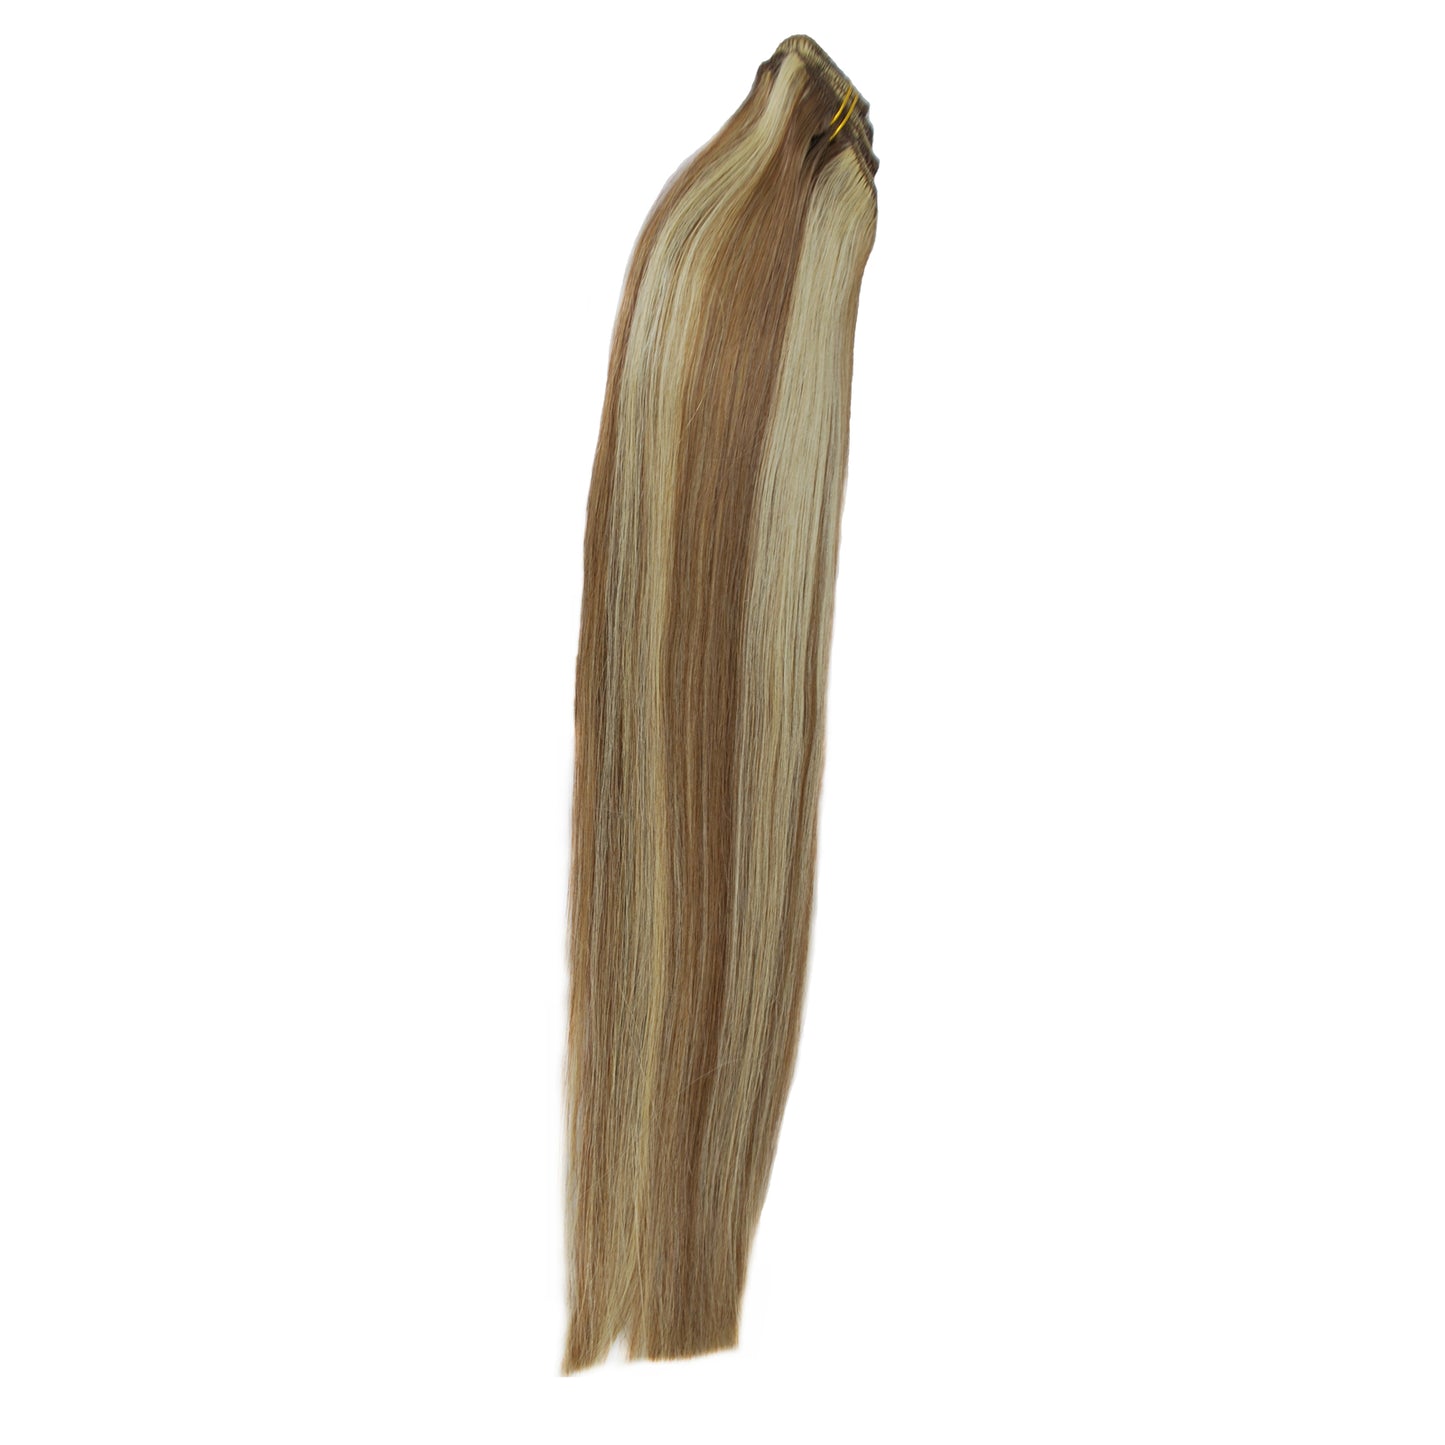 Clip in hair extensions straight 14-26 inch 100% human hair extension clip in hair 7 pc/ set